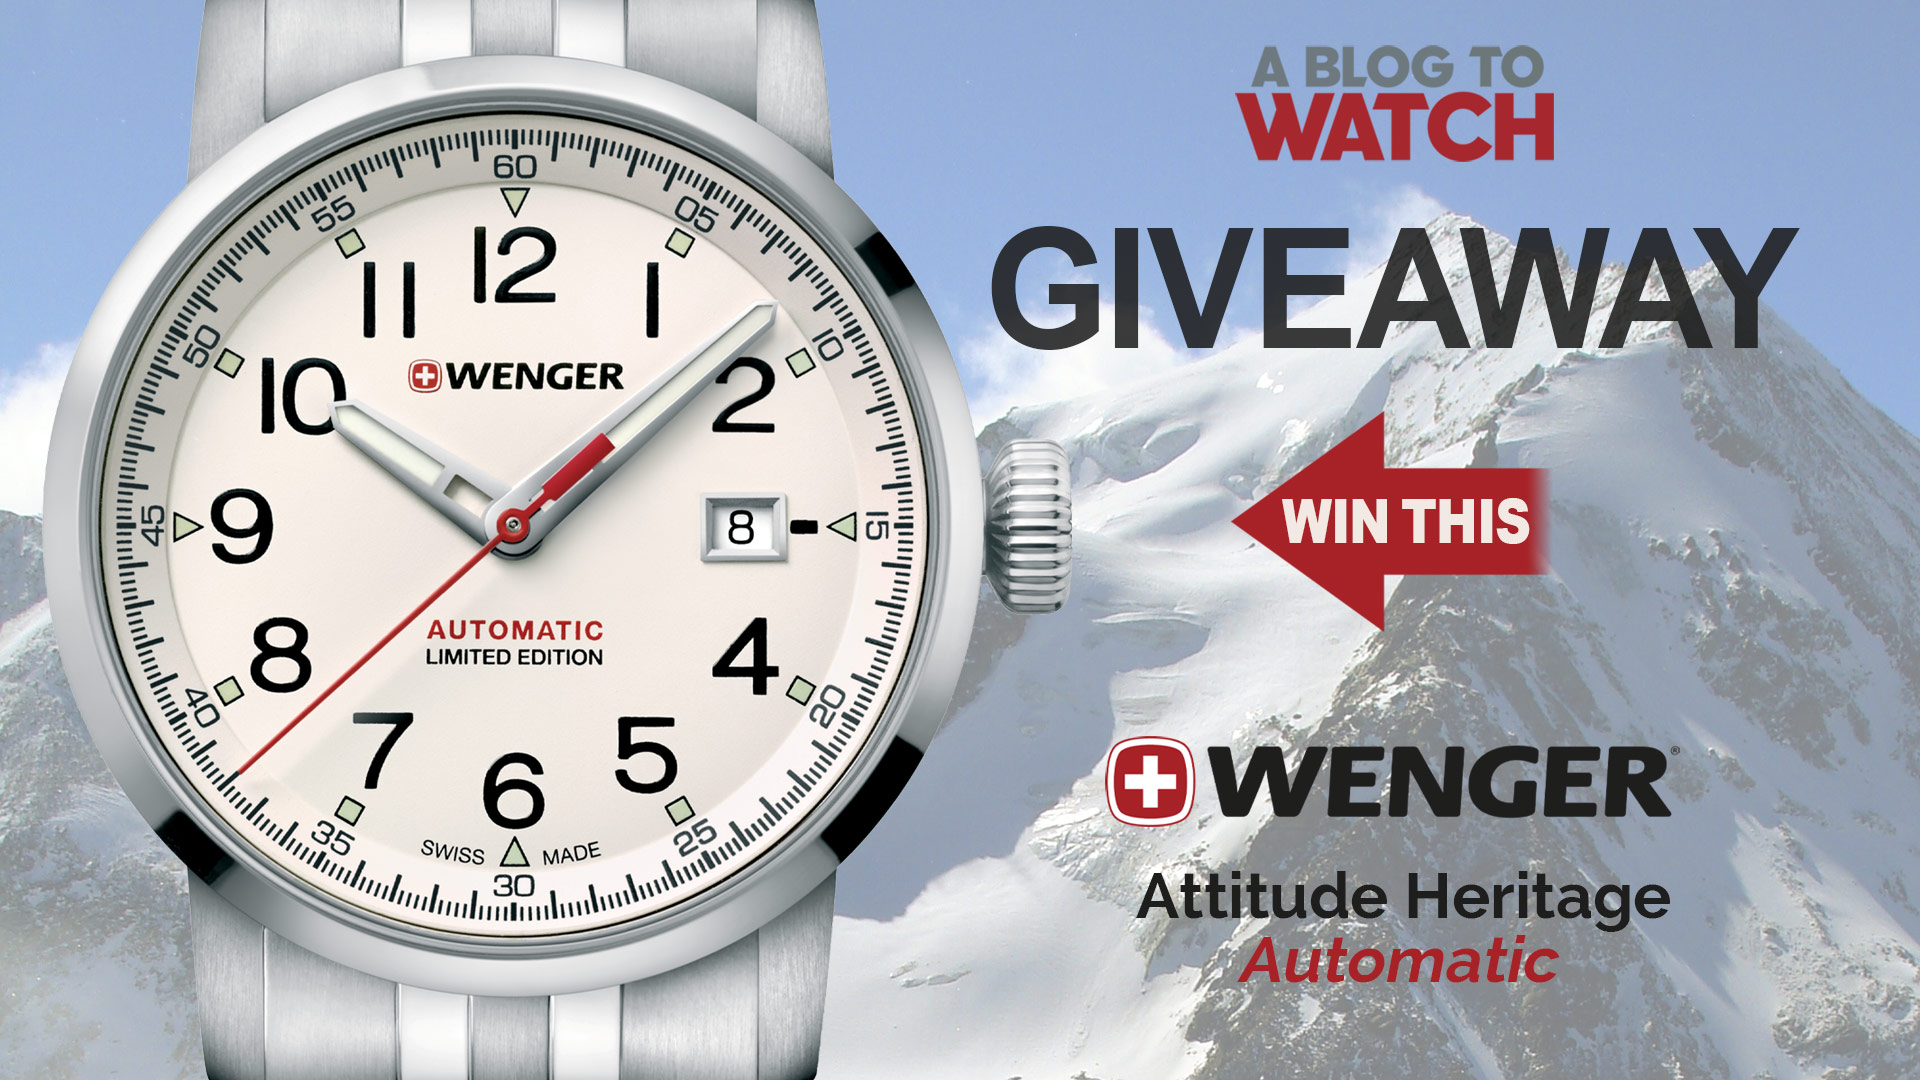 WATCH GIVEAWAY: Wenger Attitude Heritage Automatic Limited Edition